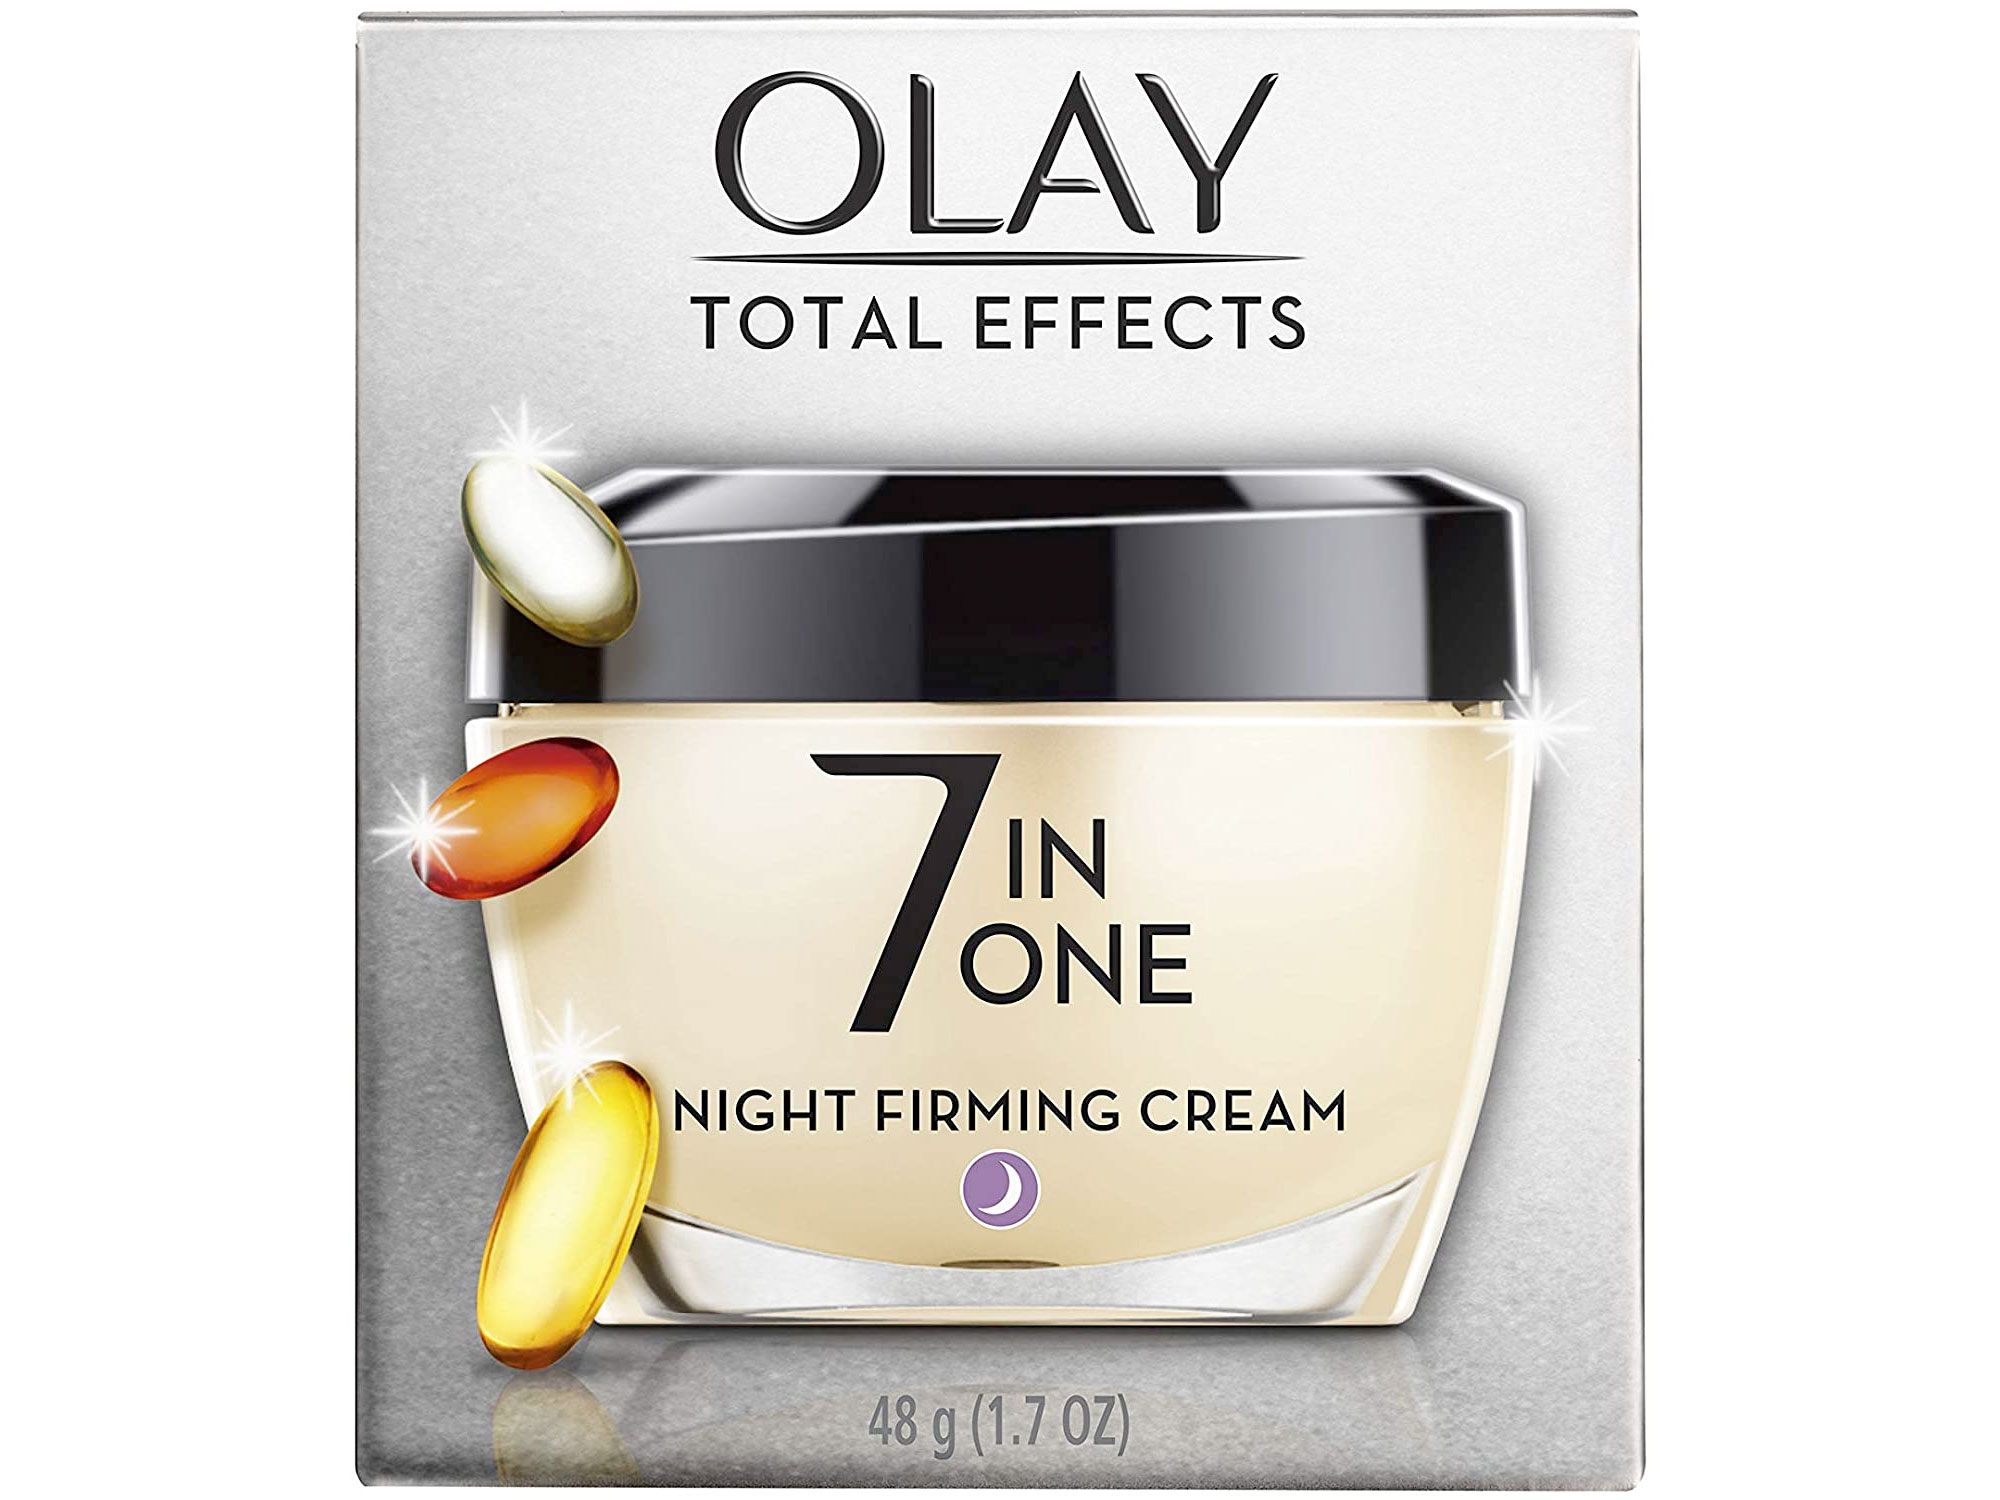 Amazon：Olay Total Effects Night Firming Cream(50ml)只卖$7.56